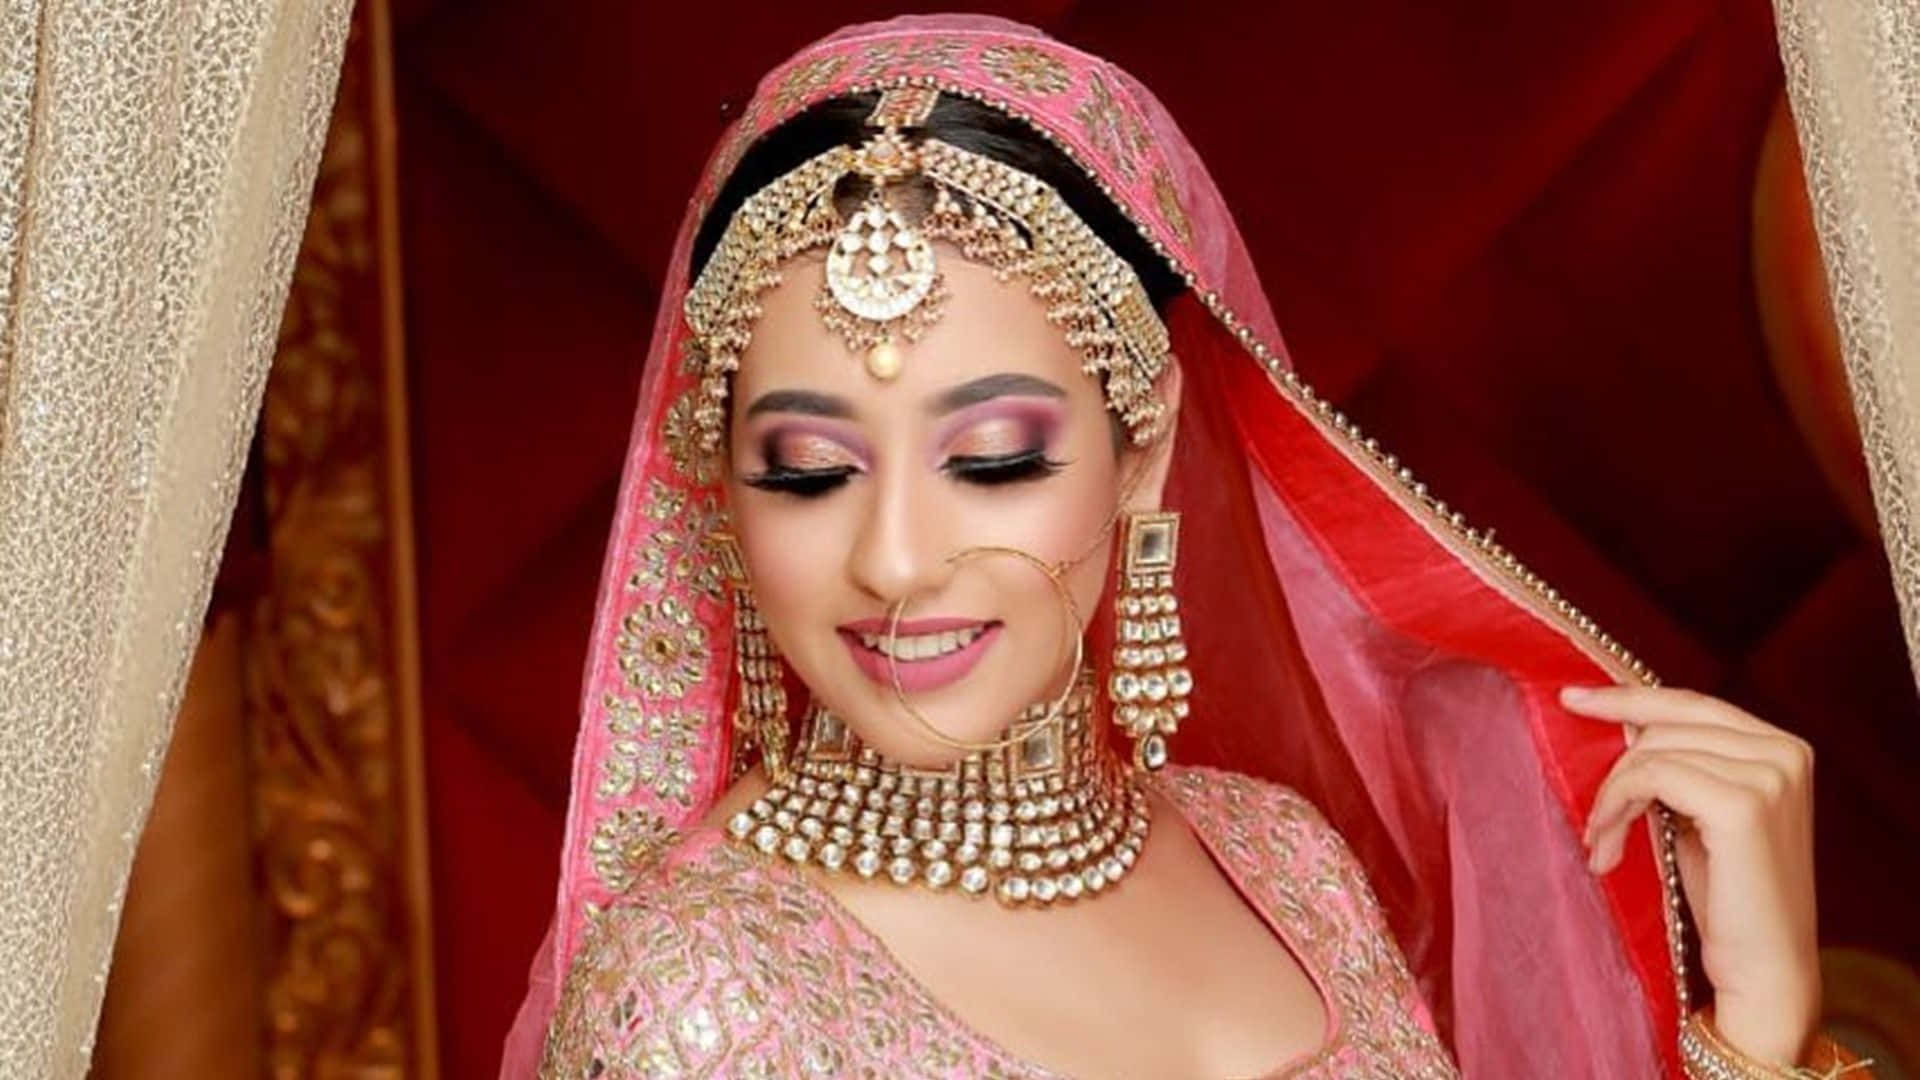 A Beautiful Bride In Pink And Gold Jewelry